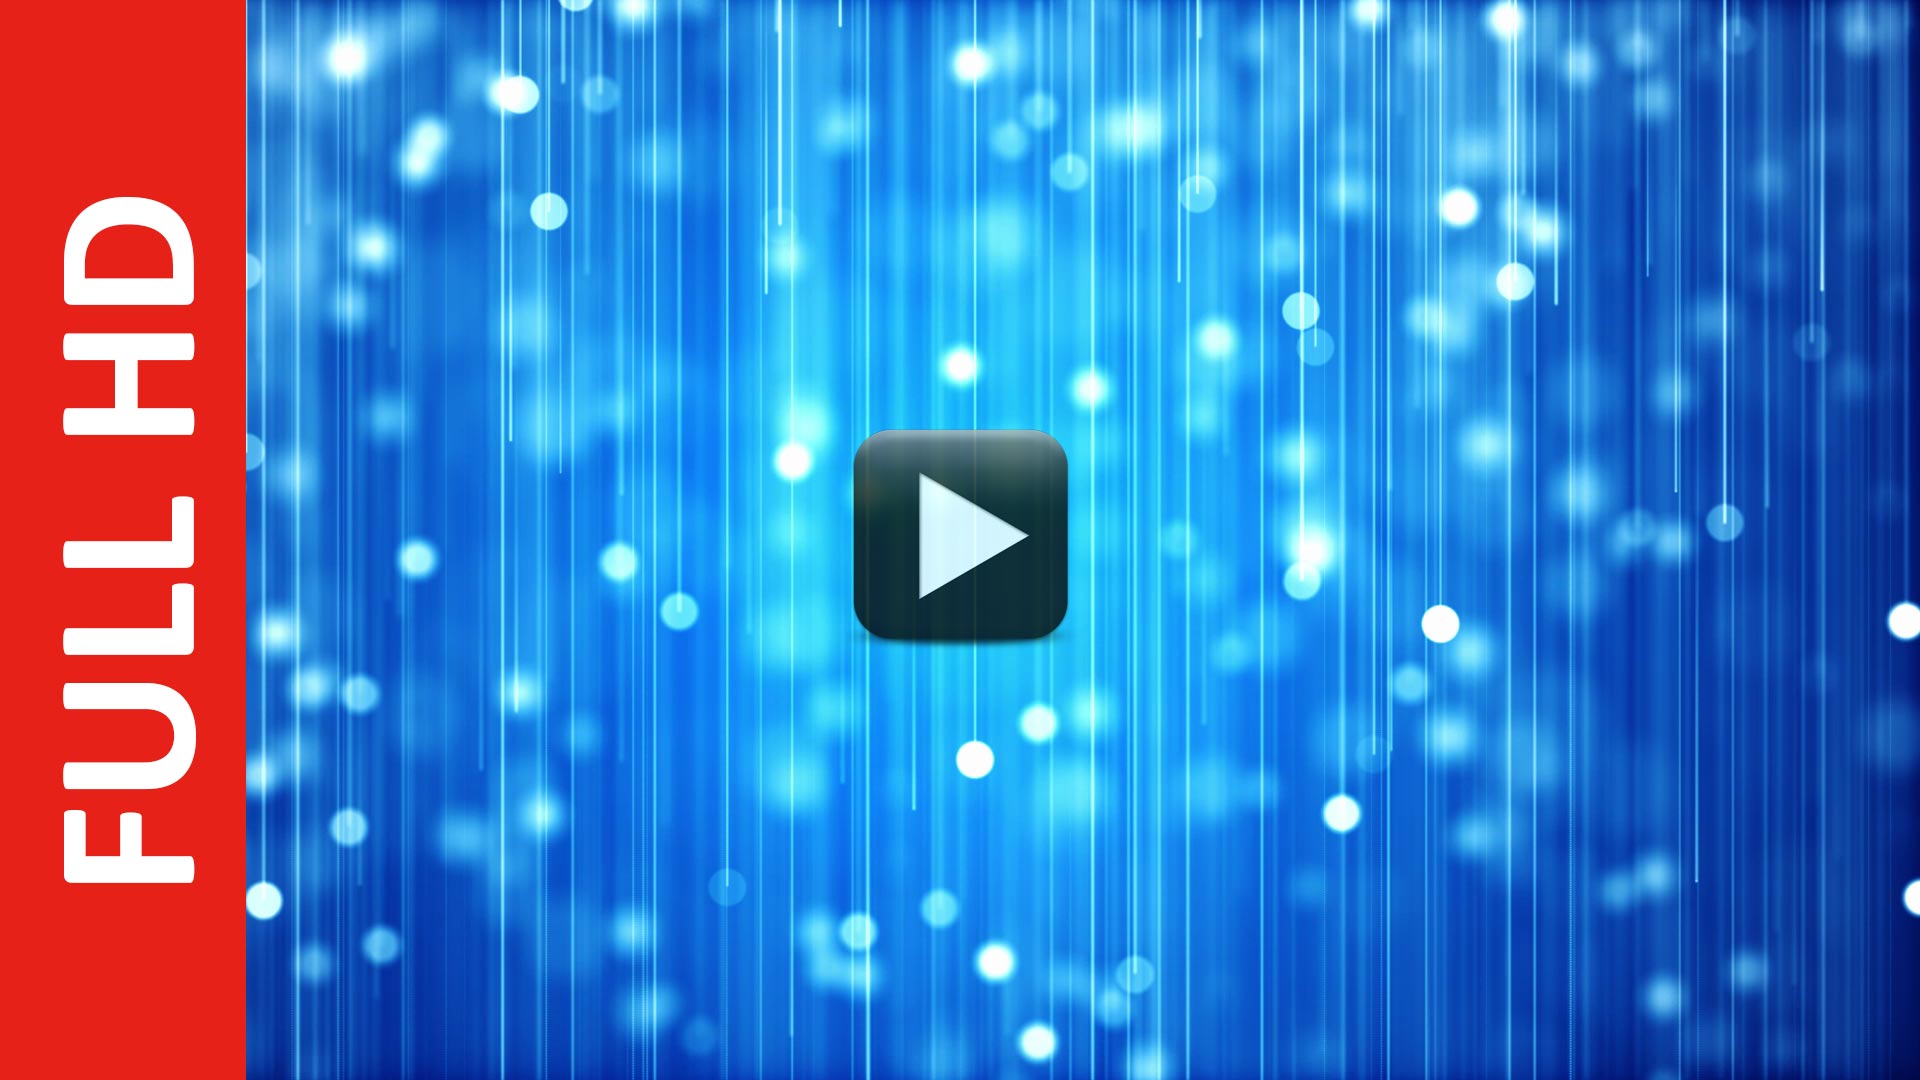 New Motion Animation Background Video Effect HD | All Design Creative